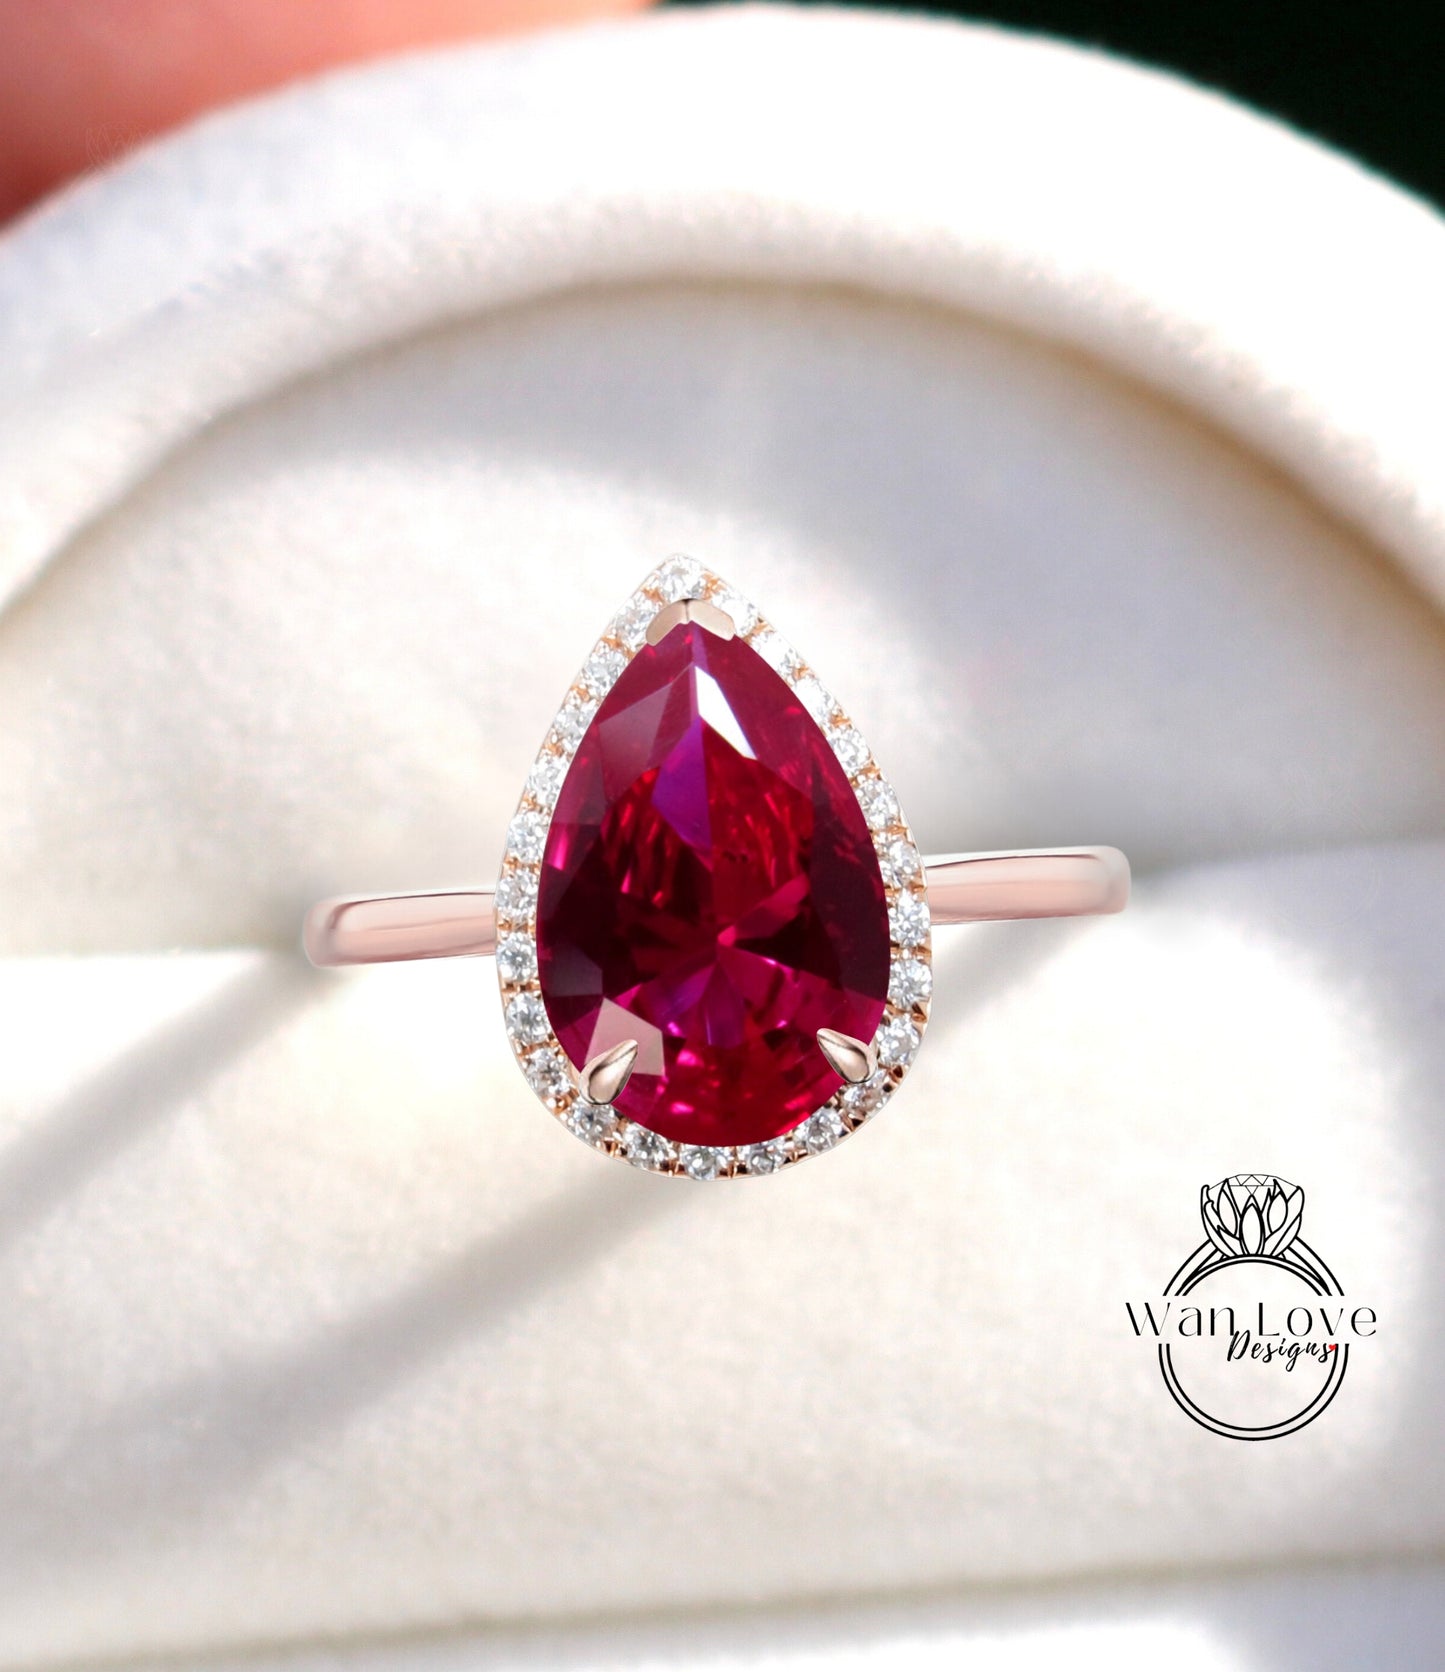 Pear shaped Ruby engagement ring vintage Unique tapered band diamond halo engagement ring white gold wedding Bridal gift for women